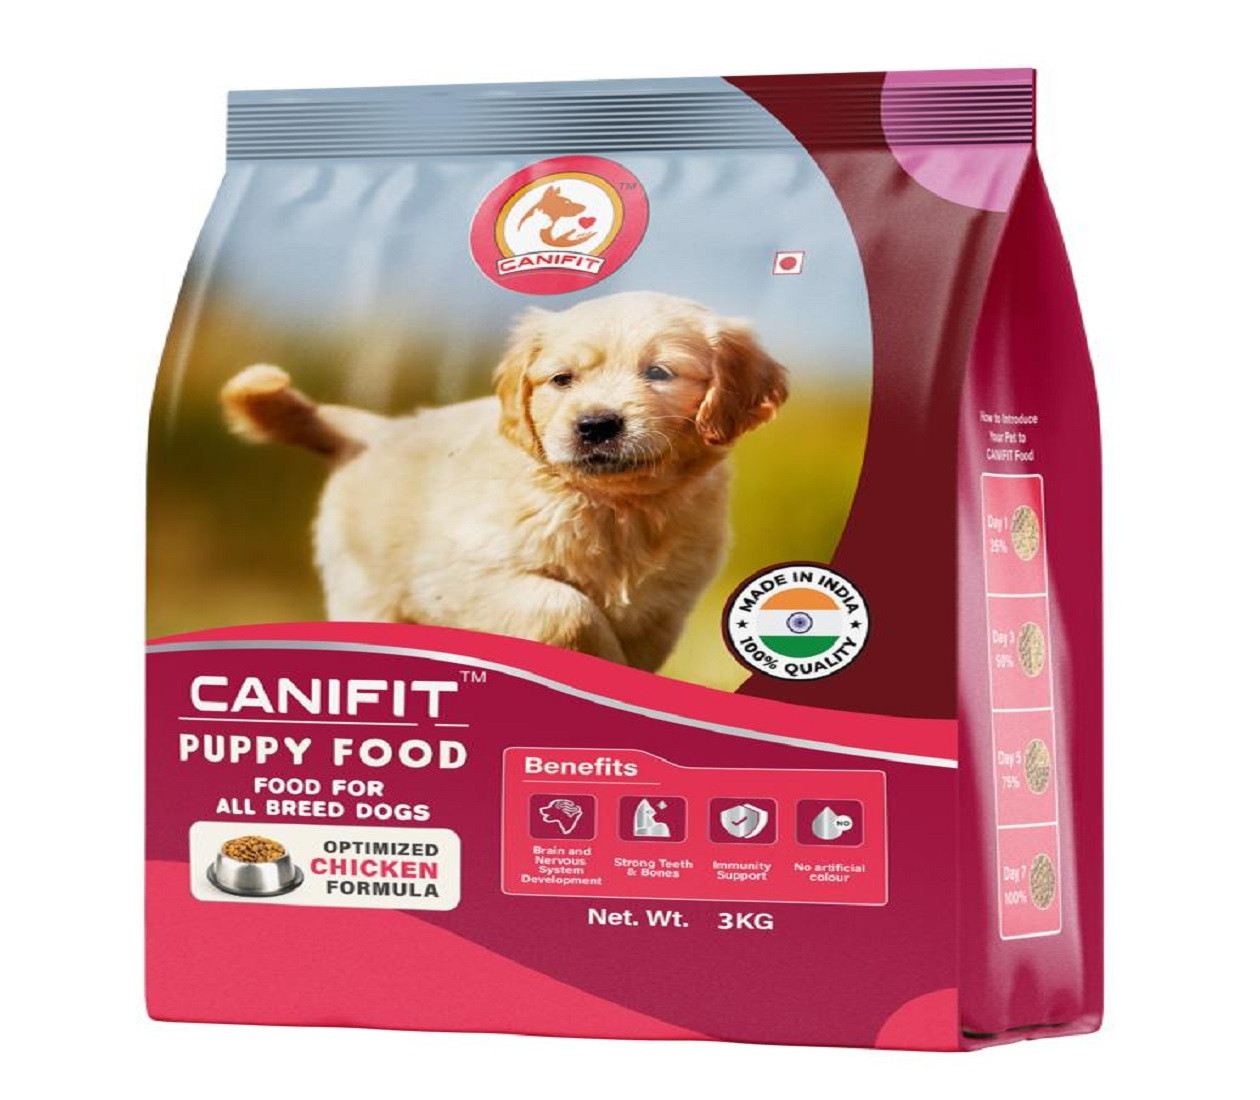 Canifit Puppy Food